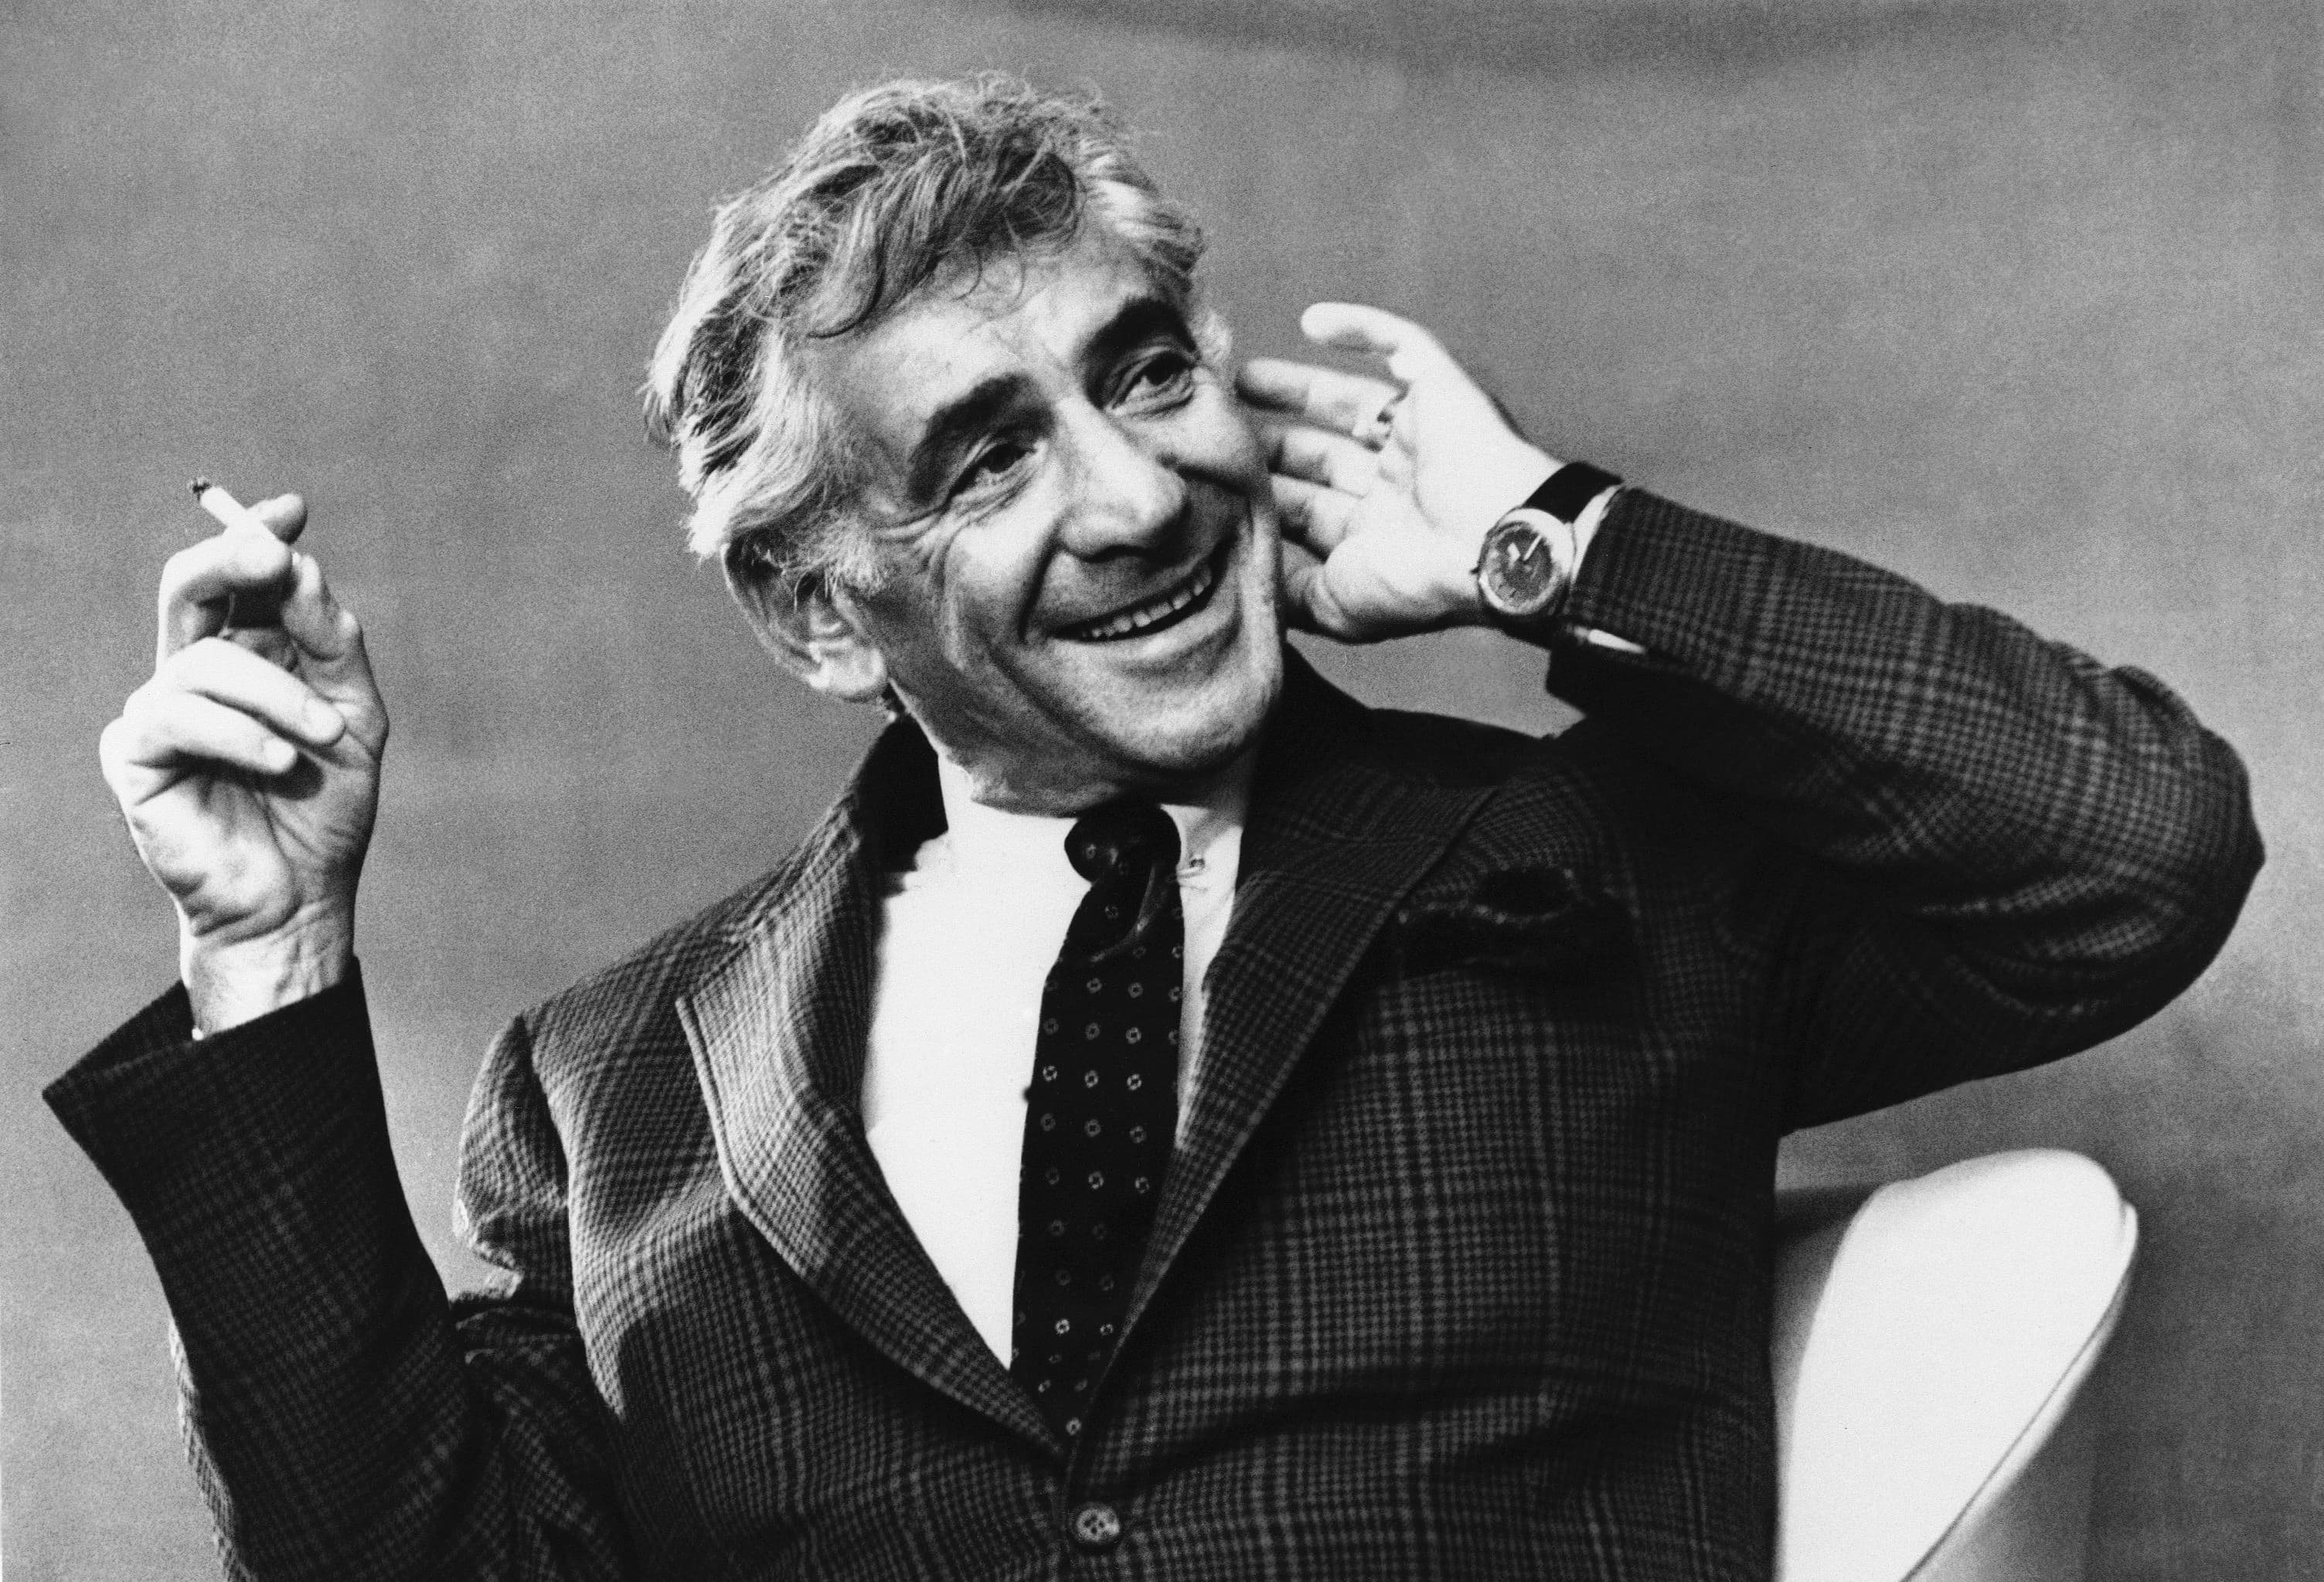 Leonard Bernstein in 1972 at a press conference in London. (AP)